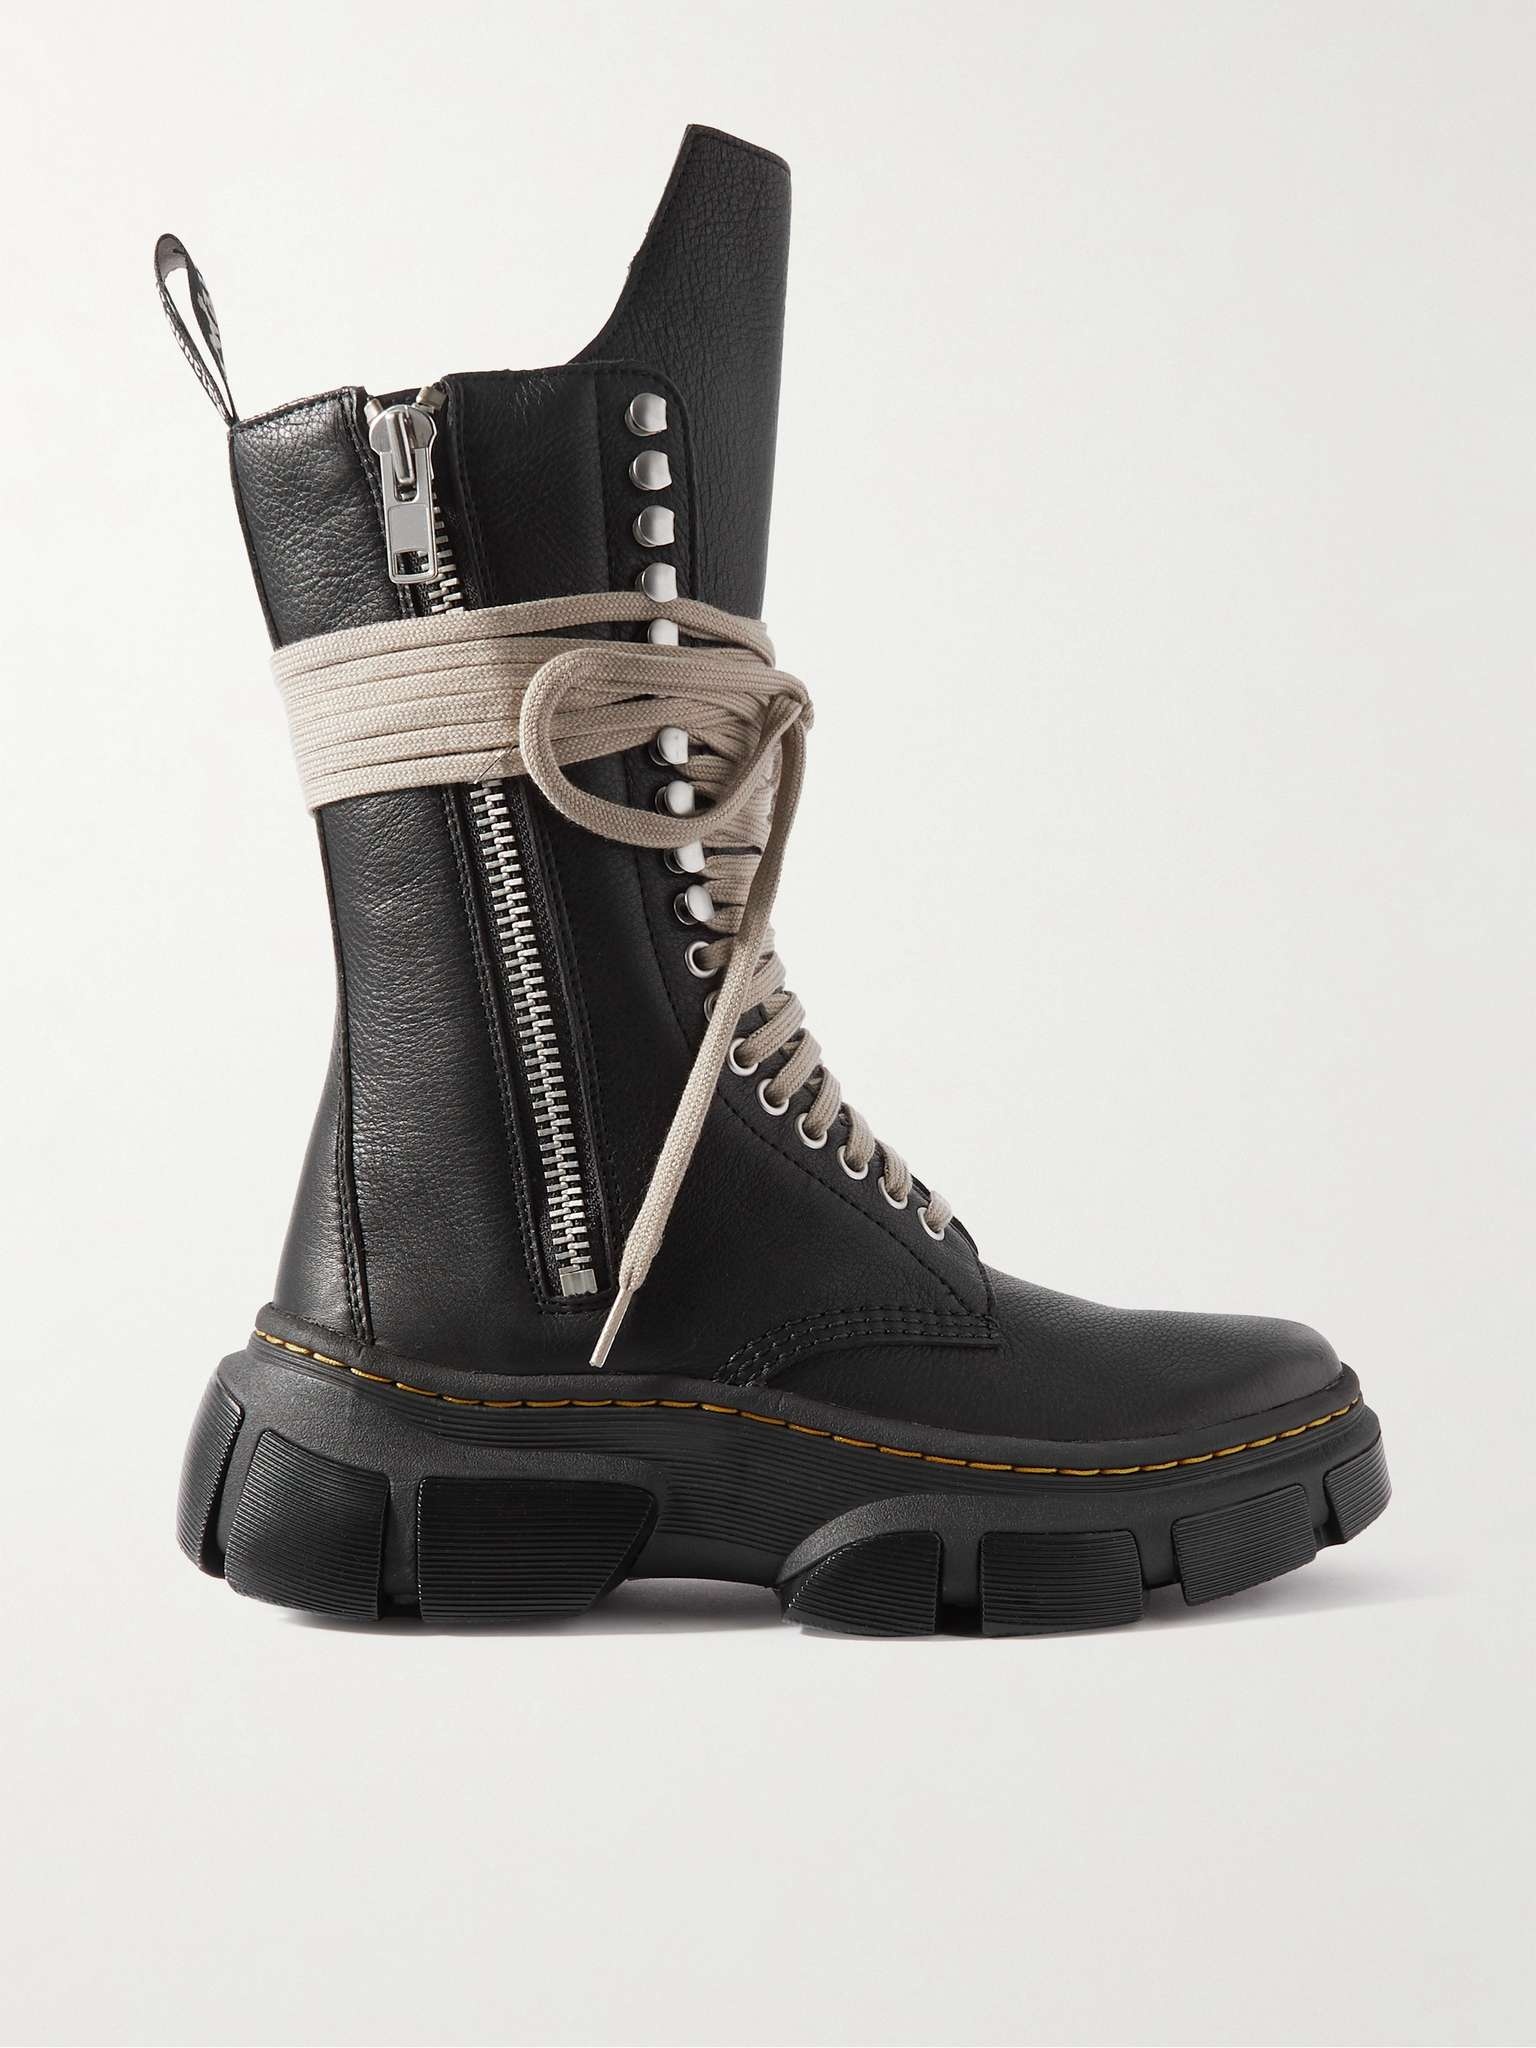 + Dr. Martens 1918 Full-Grain Leather Boots - 1